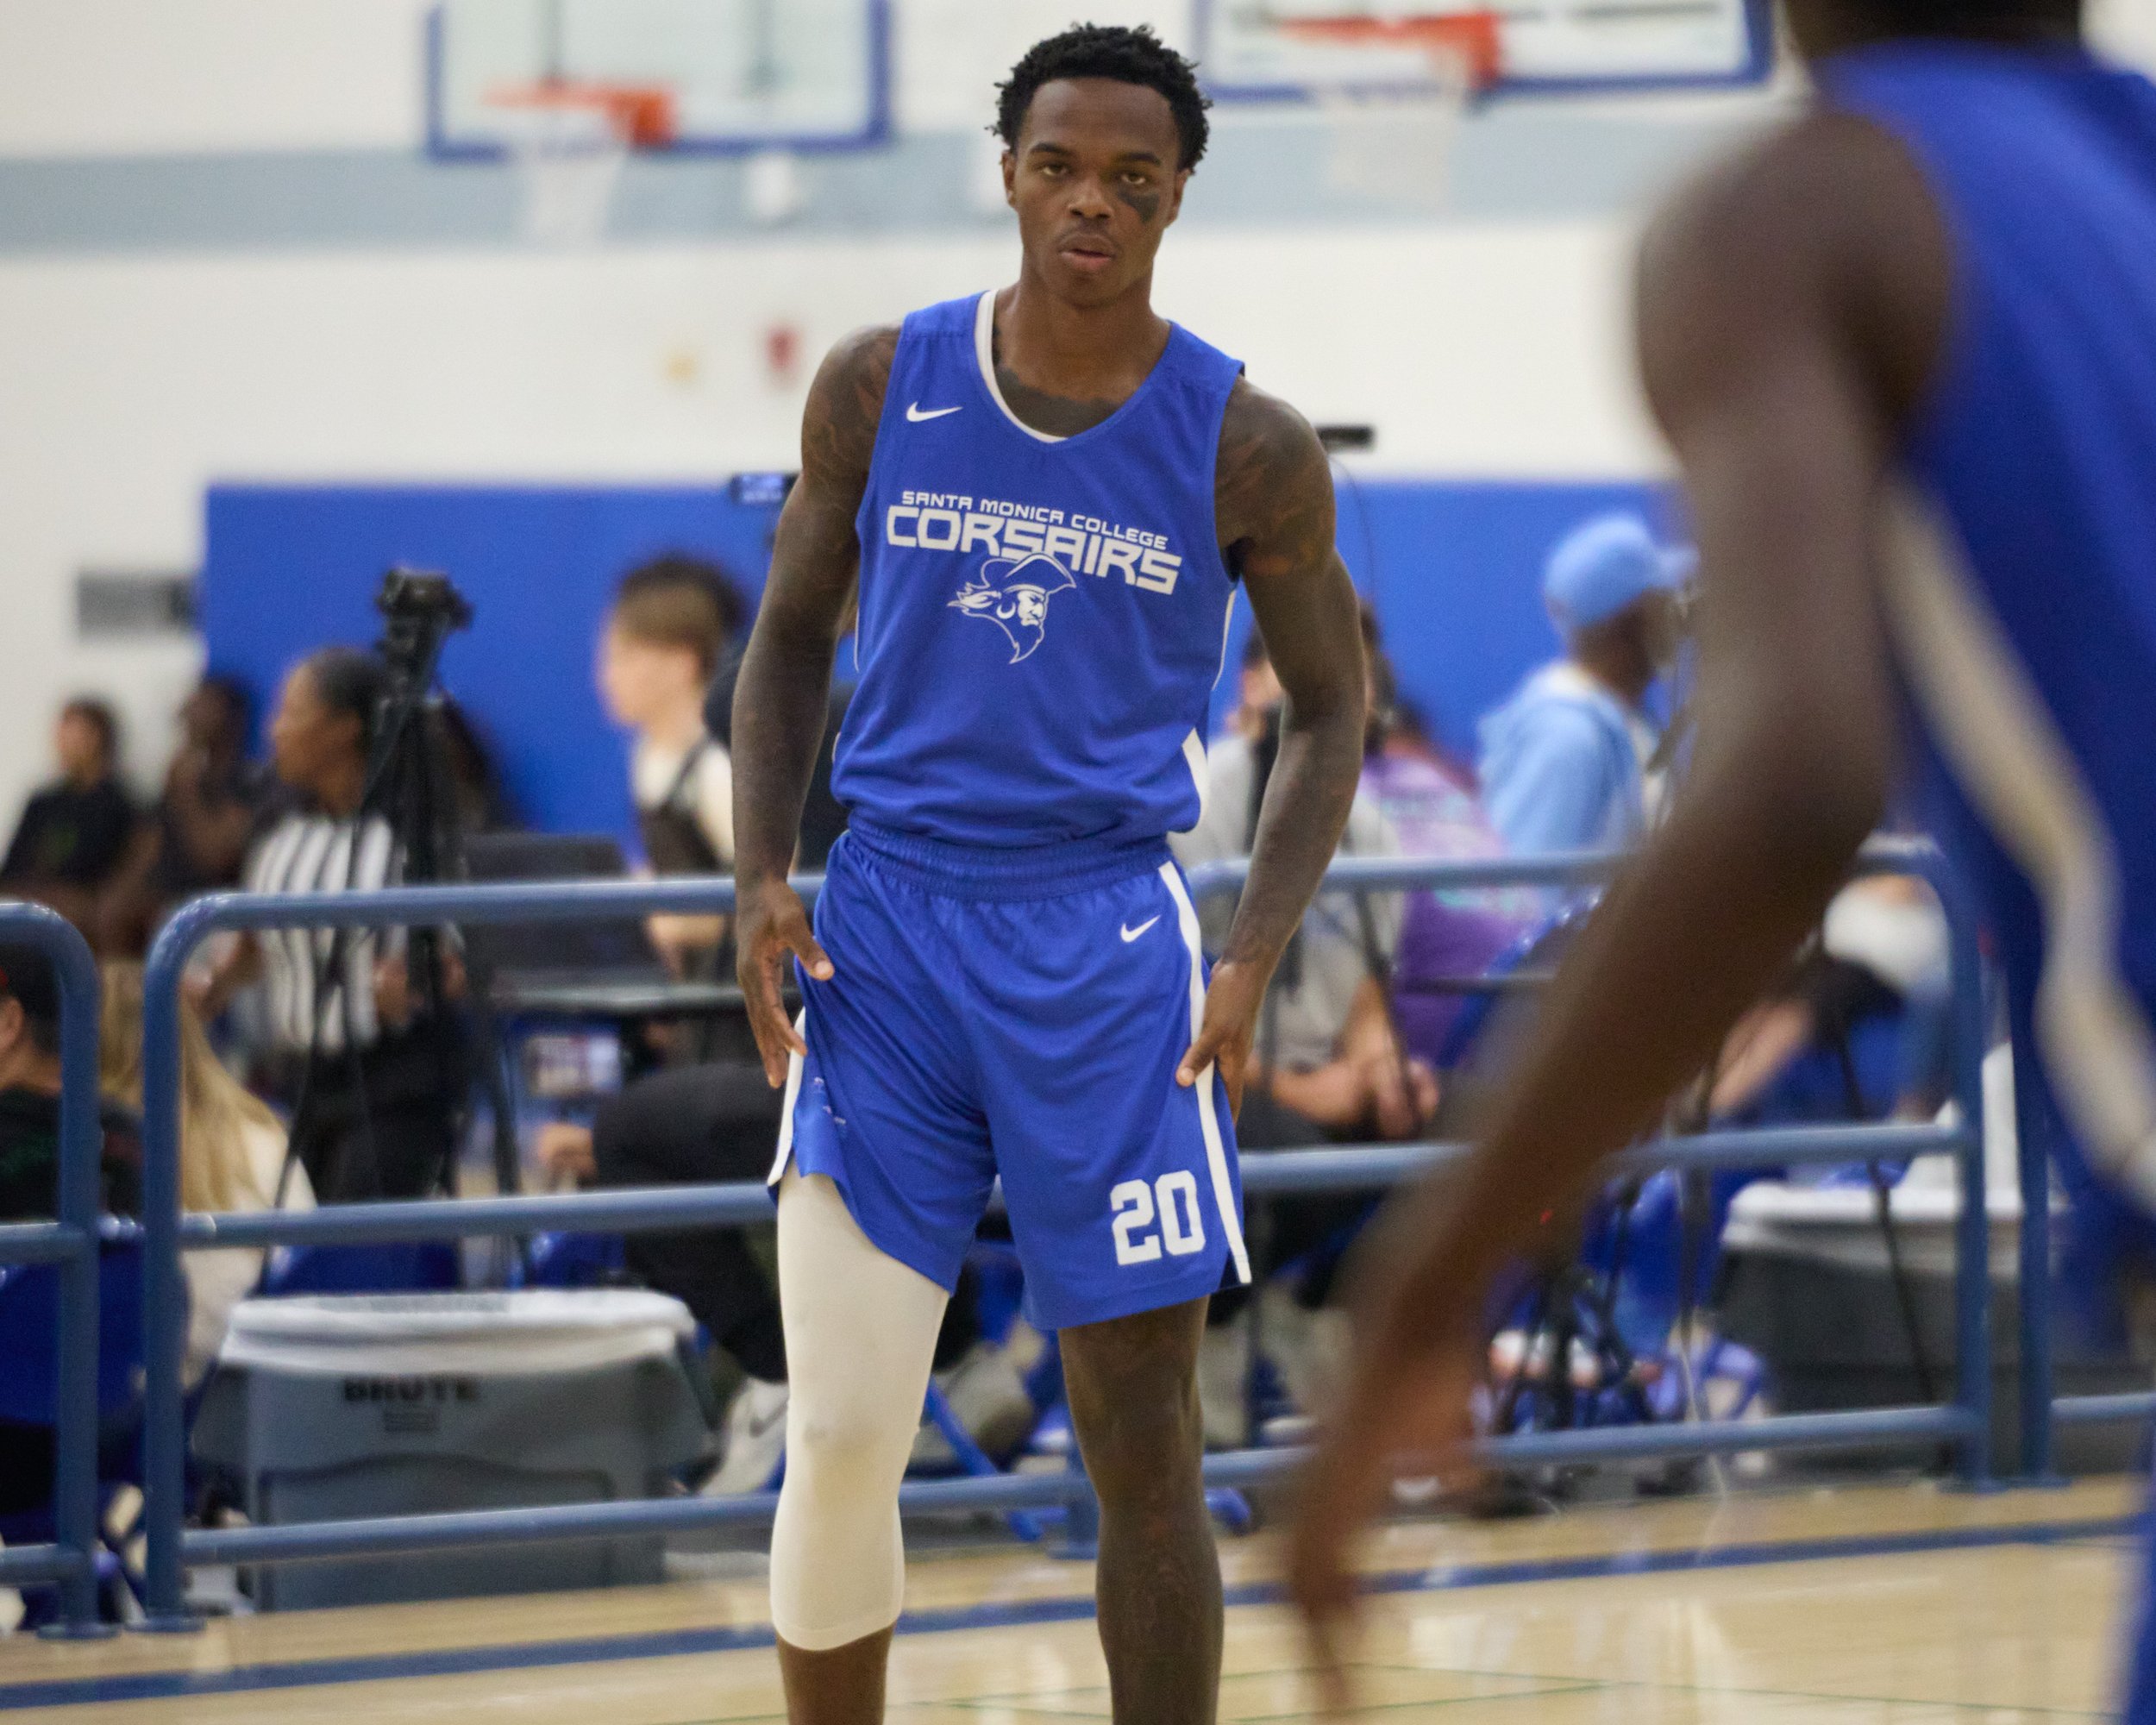  Santa Monica College Corsairs' Kodee Holloway during the men's basketball match against the Orange Coast College Pirates at the SoCal Fall Juco Jamboree on Sundy, Spet 17, 2023, at Cerritos College in Norwalk, Calif. The Corsairs lost 70-76. (Nichol